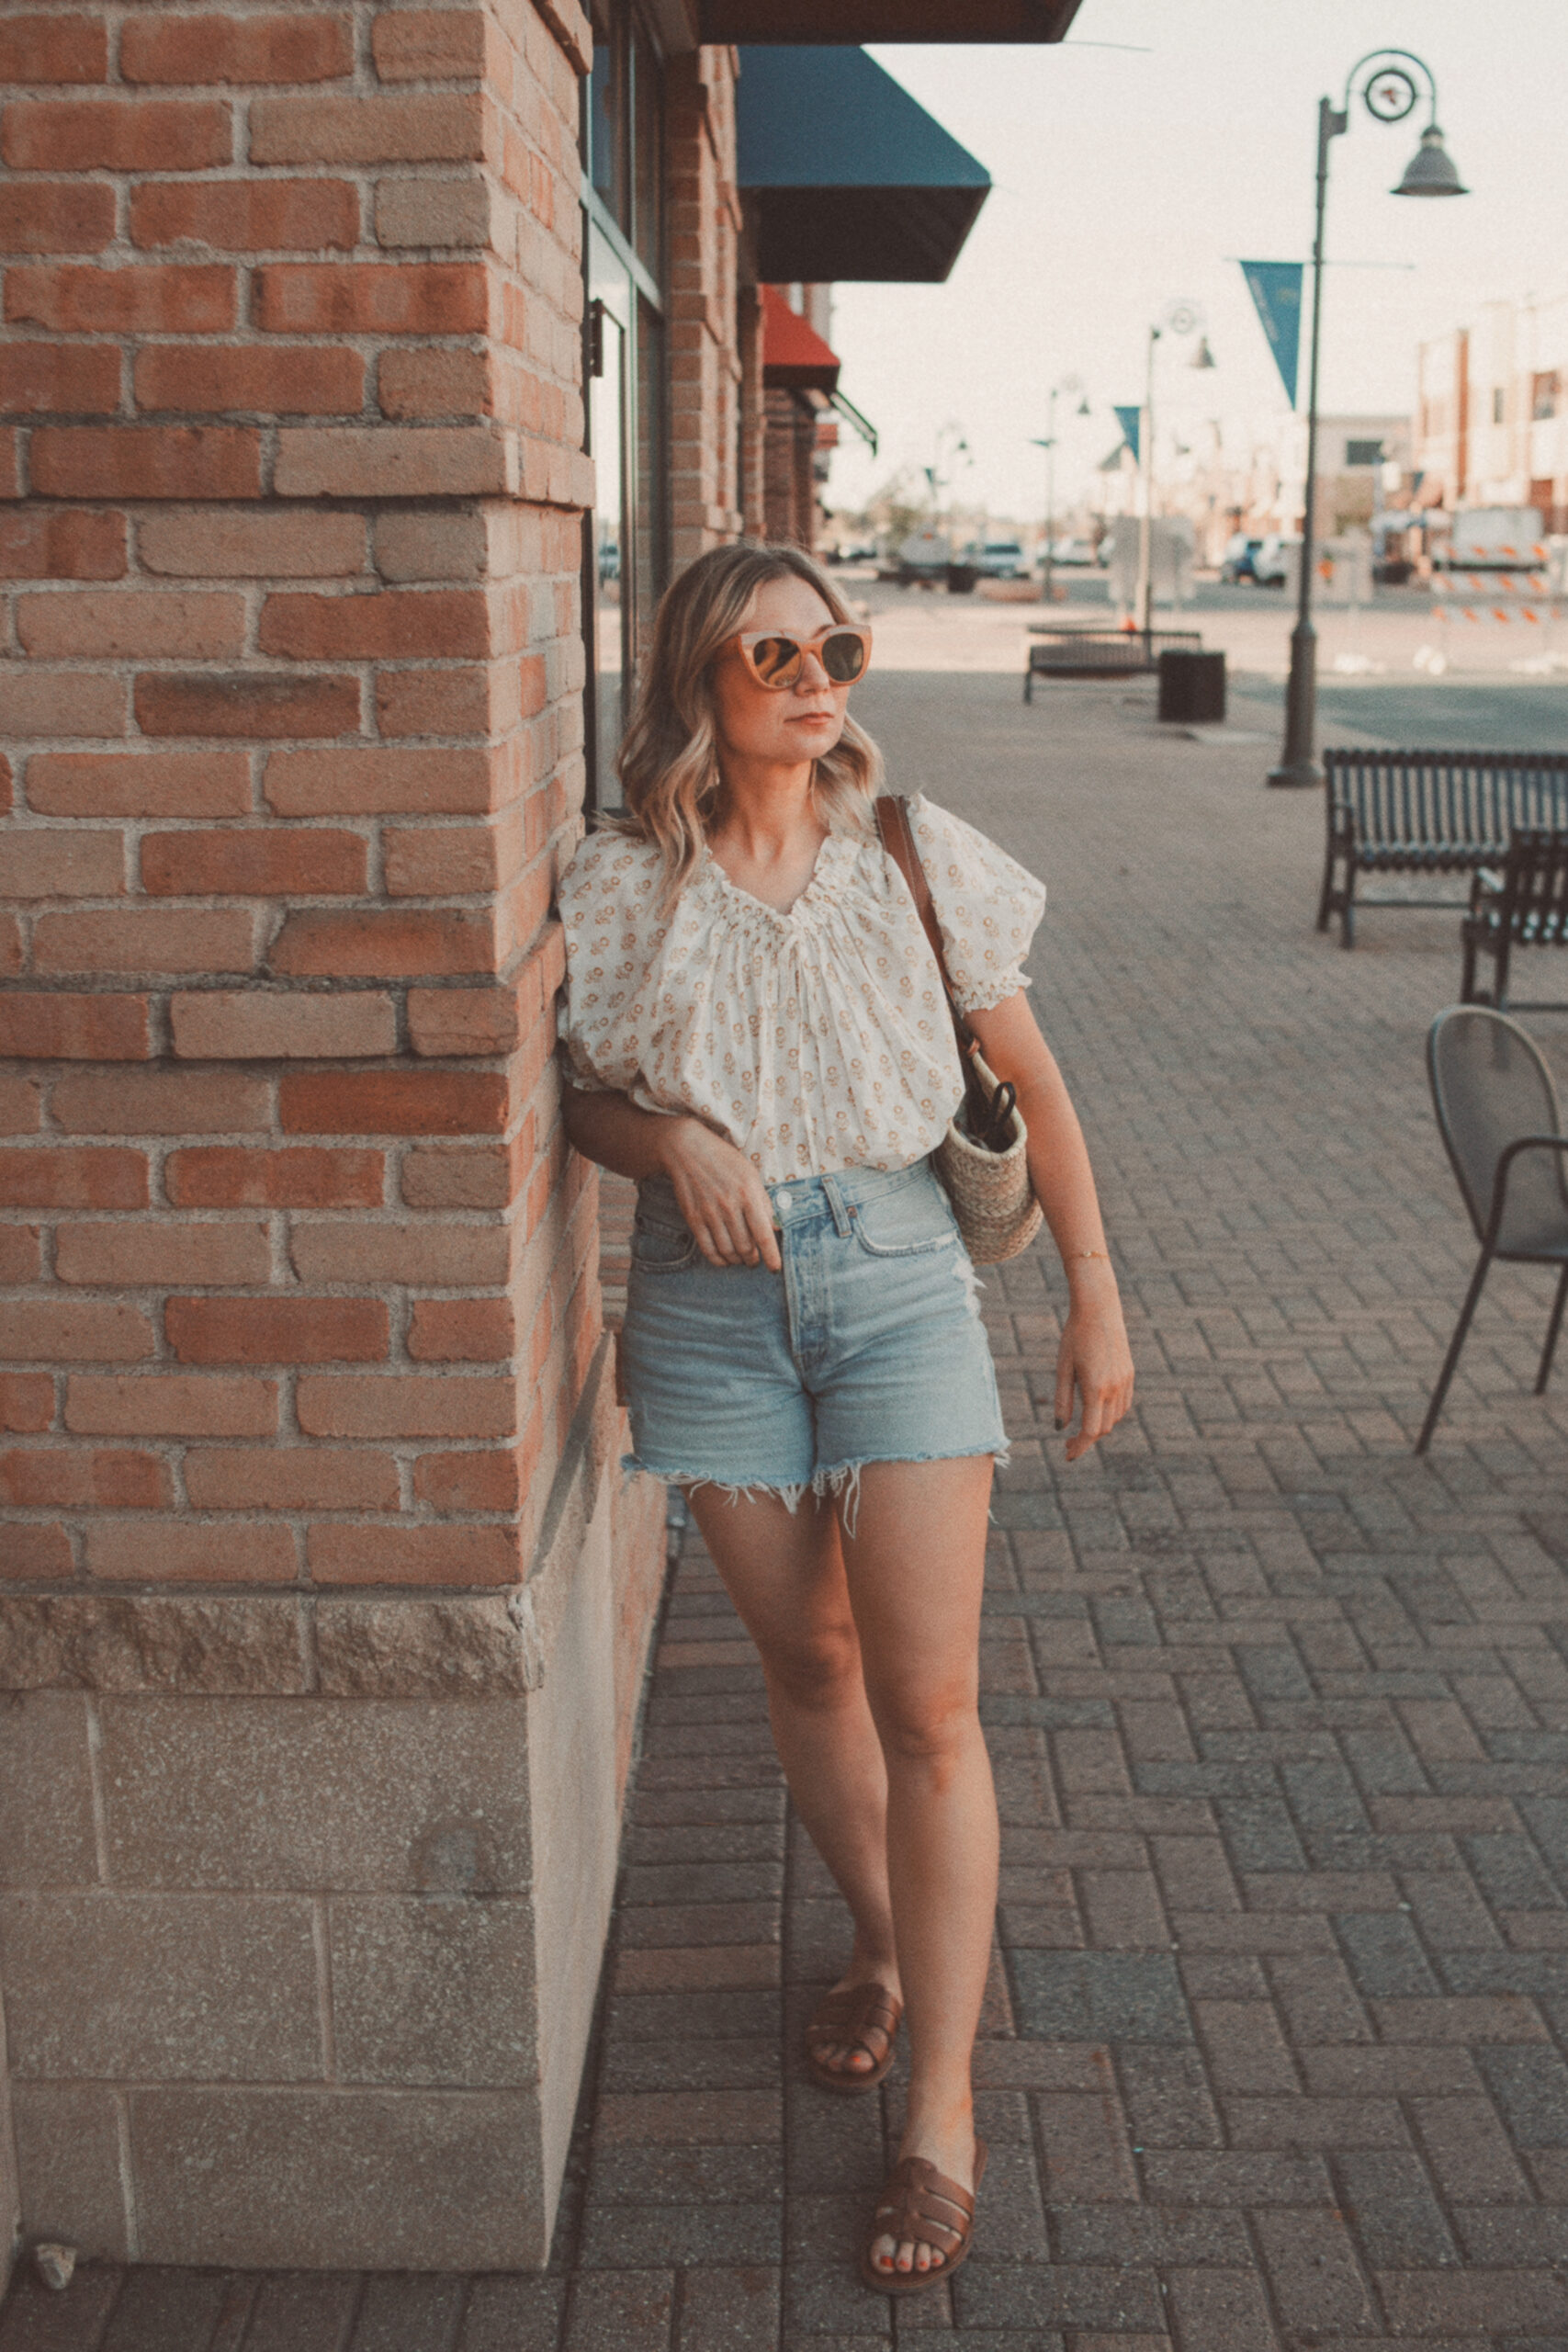 Karin Emily wears a floral doen top, light wash jean shorts, and brown strappy sandals